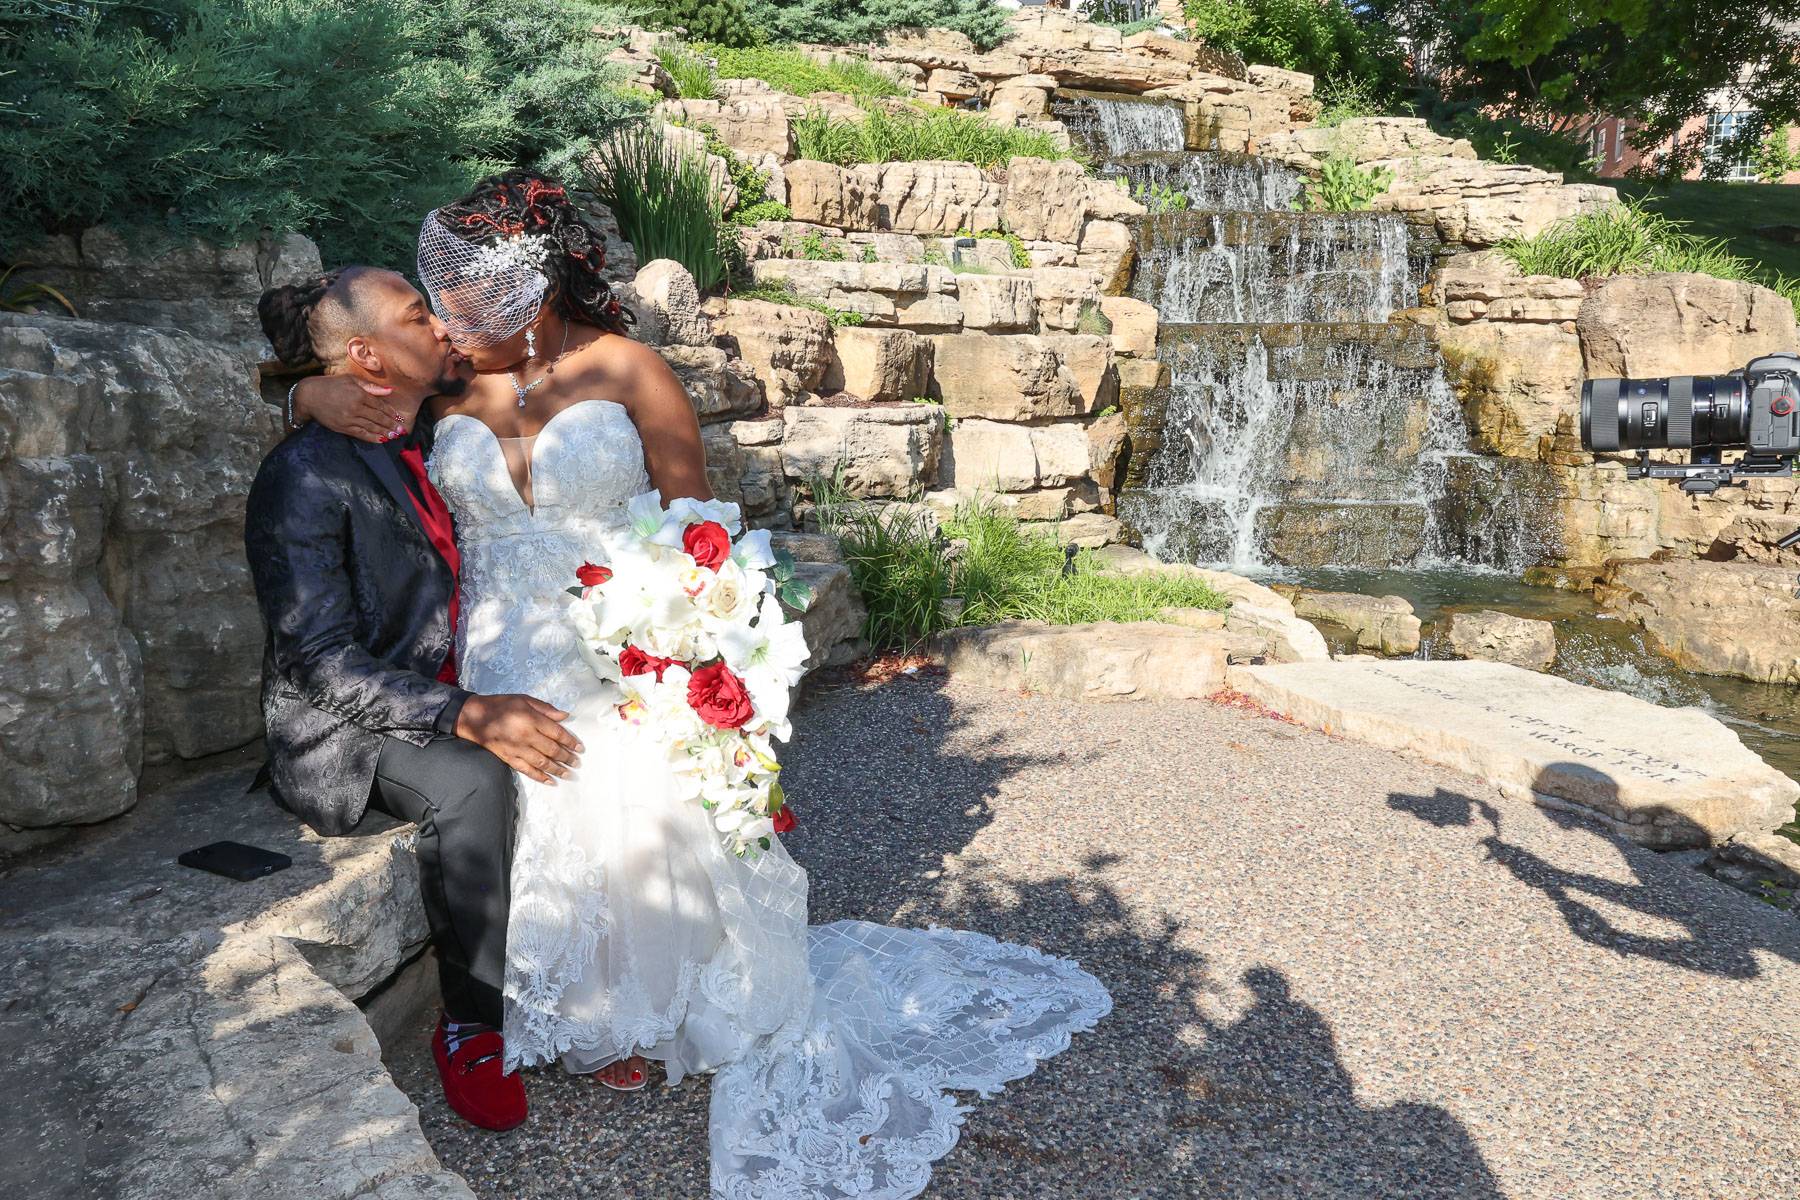 The newlyweds kiss while sitting on a stone surface